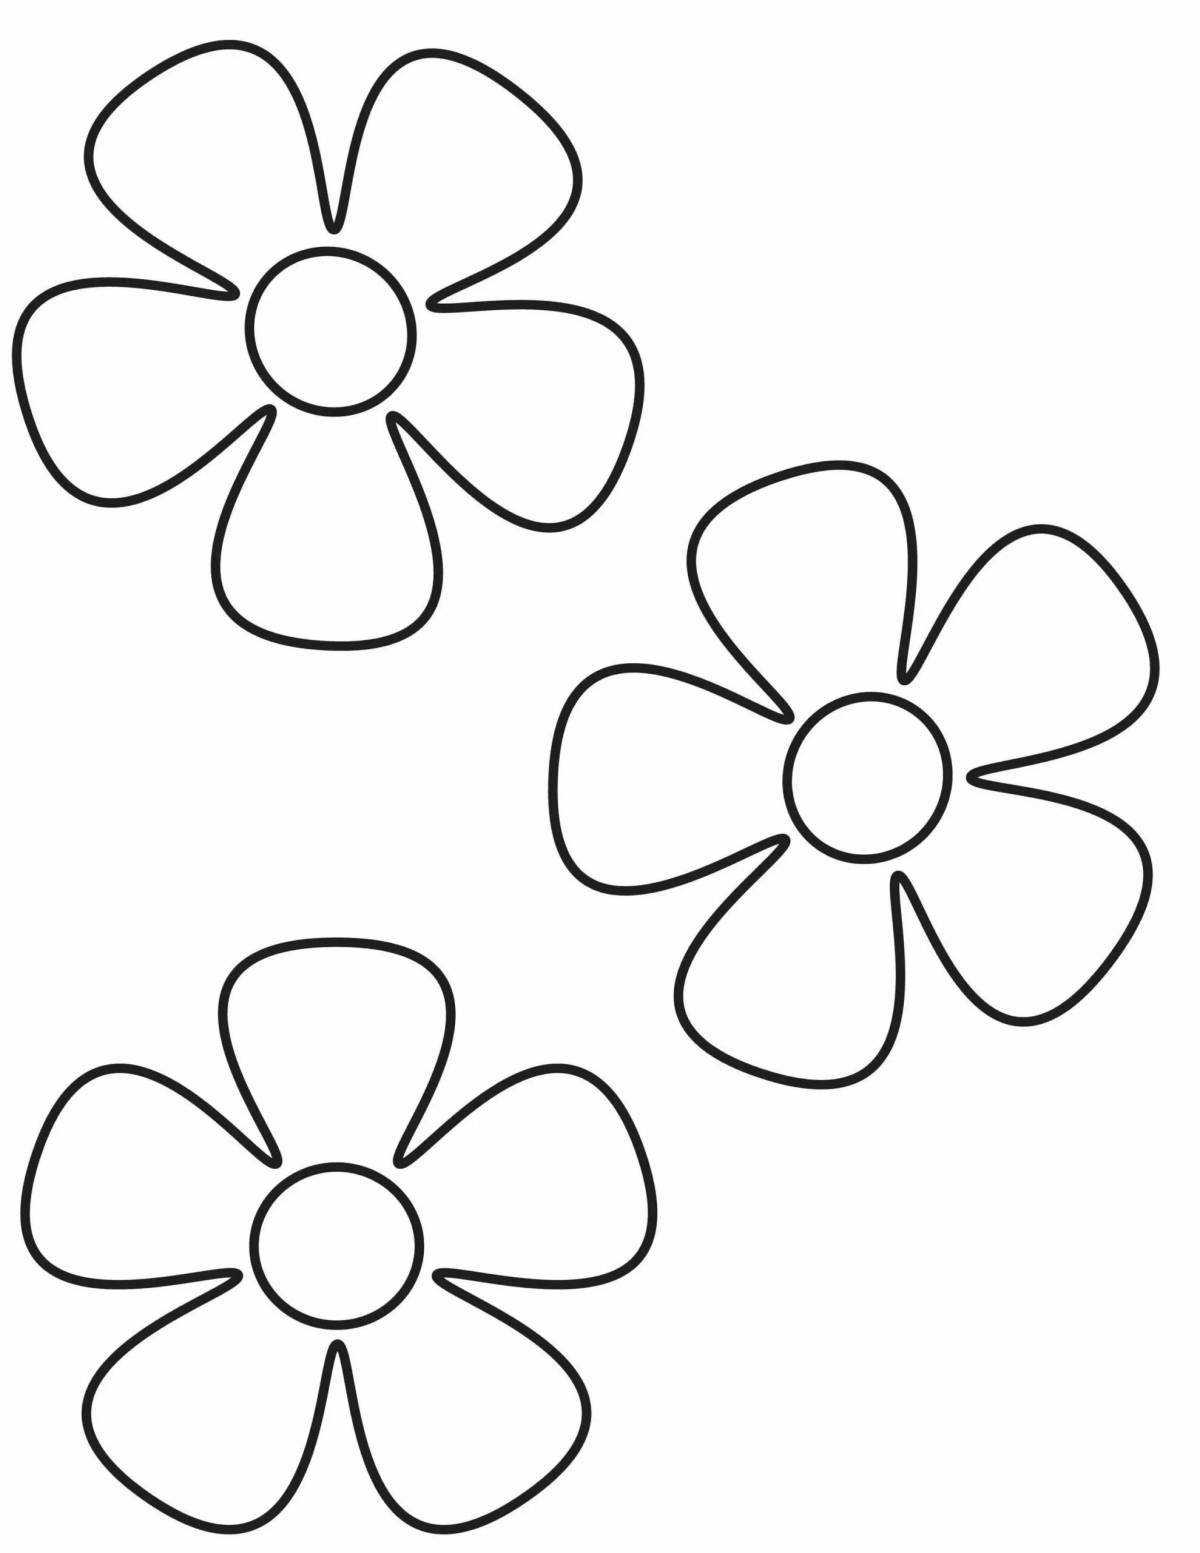 Uplifting coloring flower picture